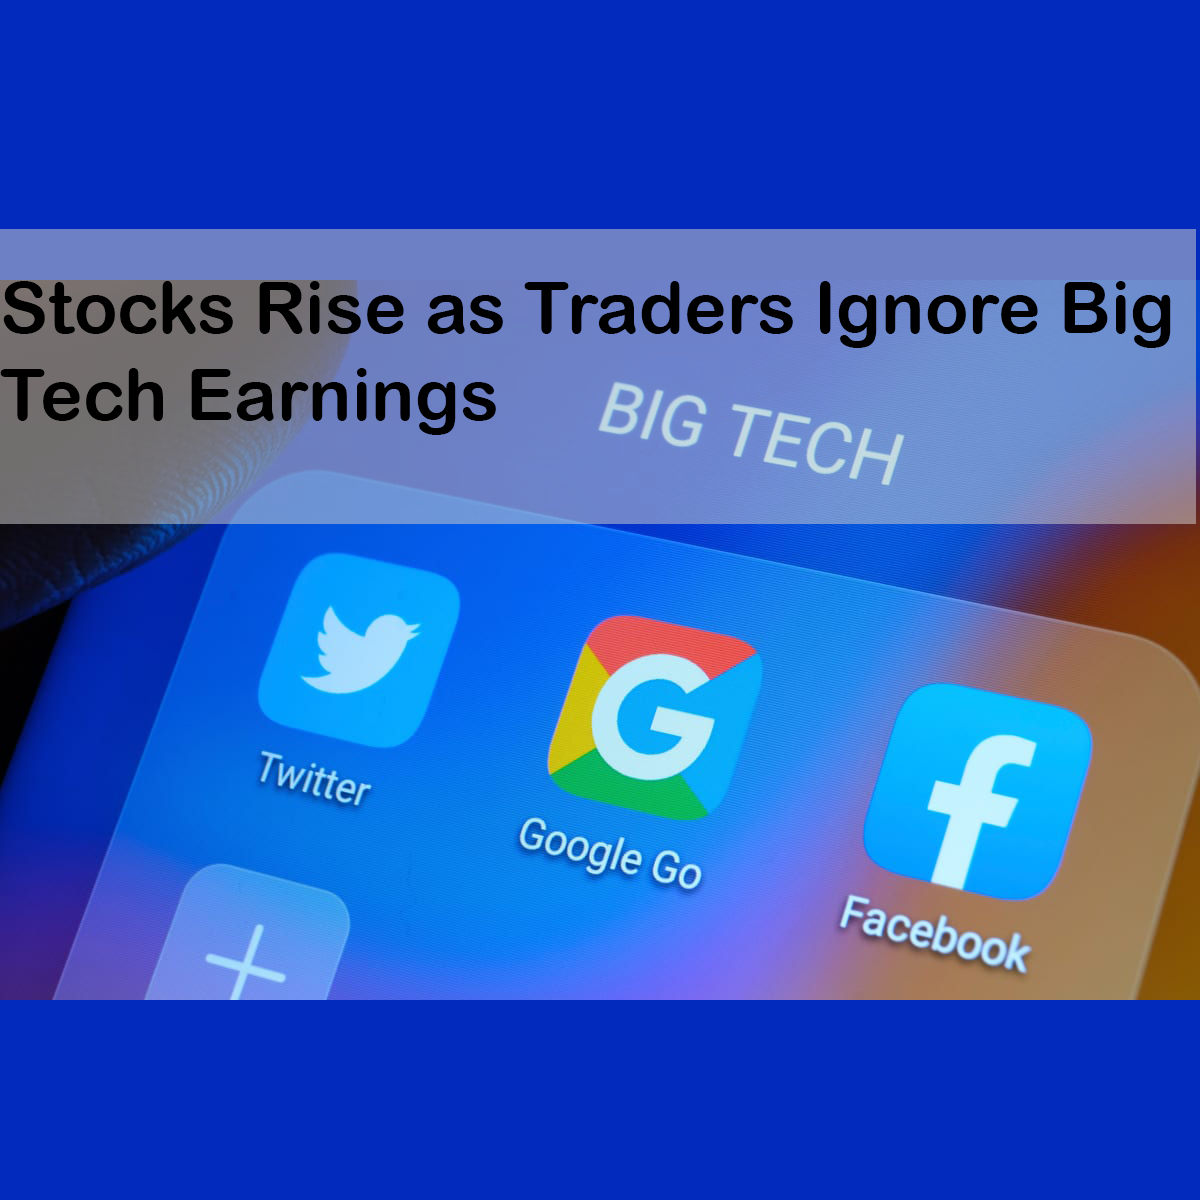 Stocks Rise as Traders Ignore Big Tech Earnings